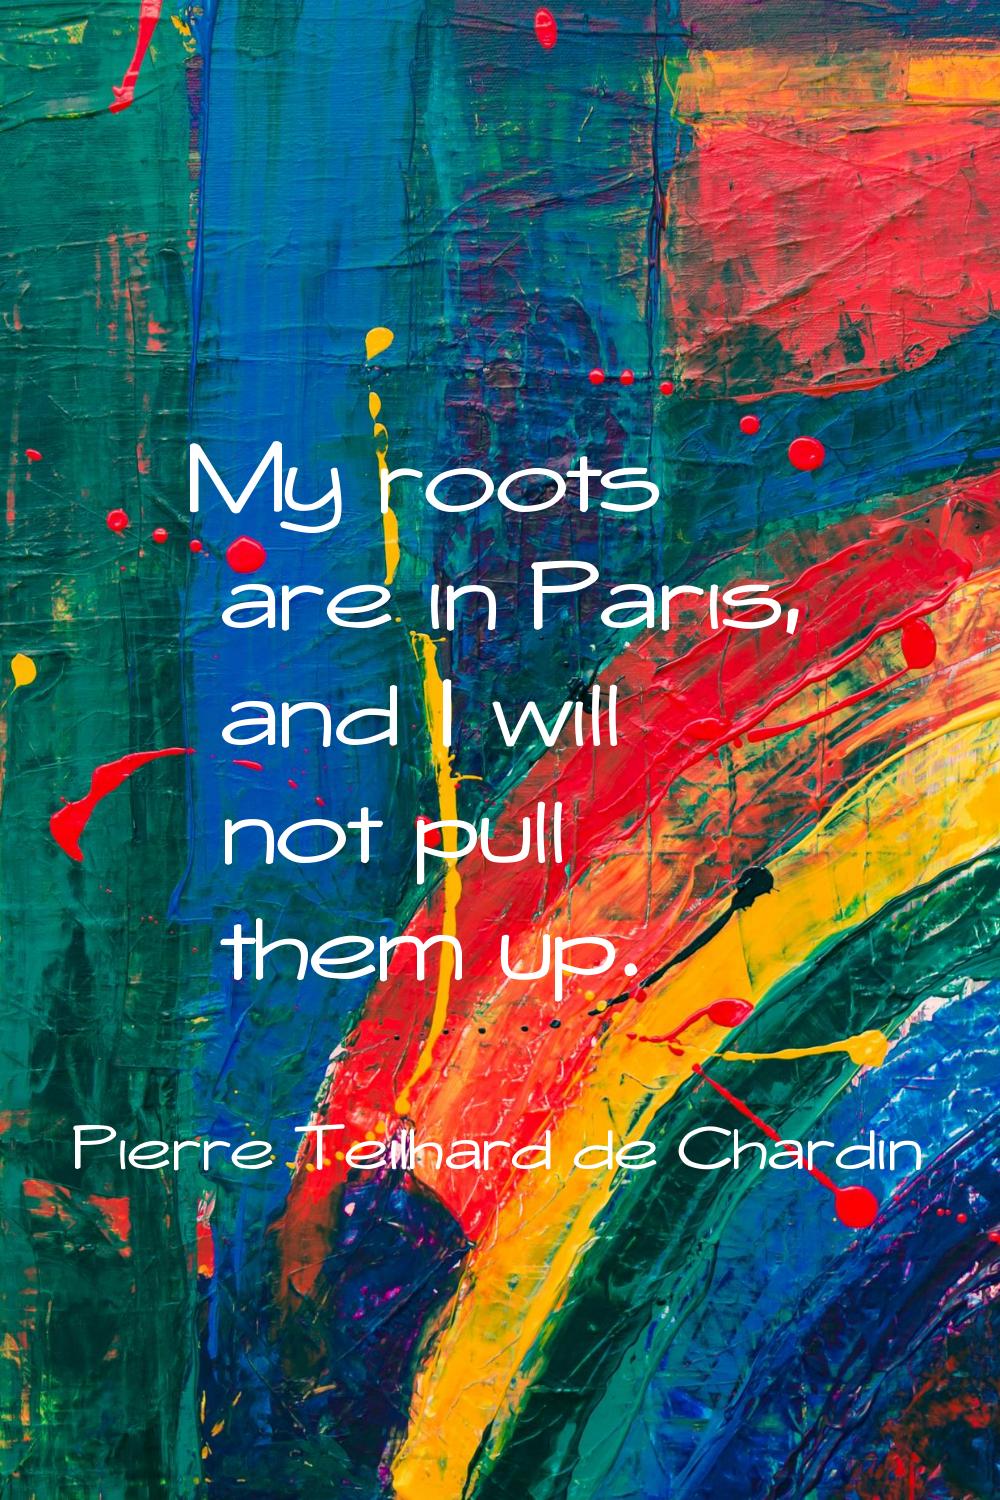 My roots are in Paris, and I will not pull them up.